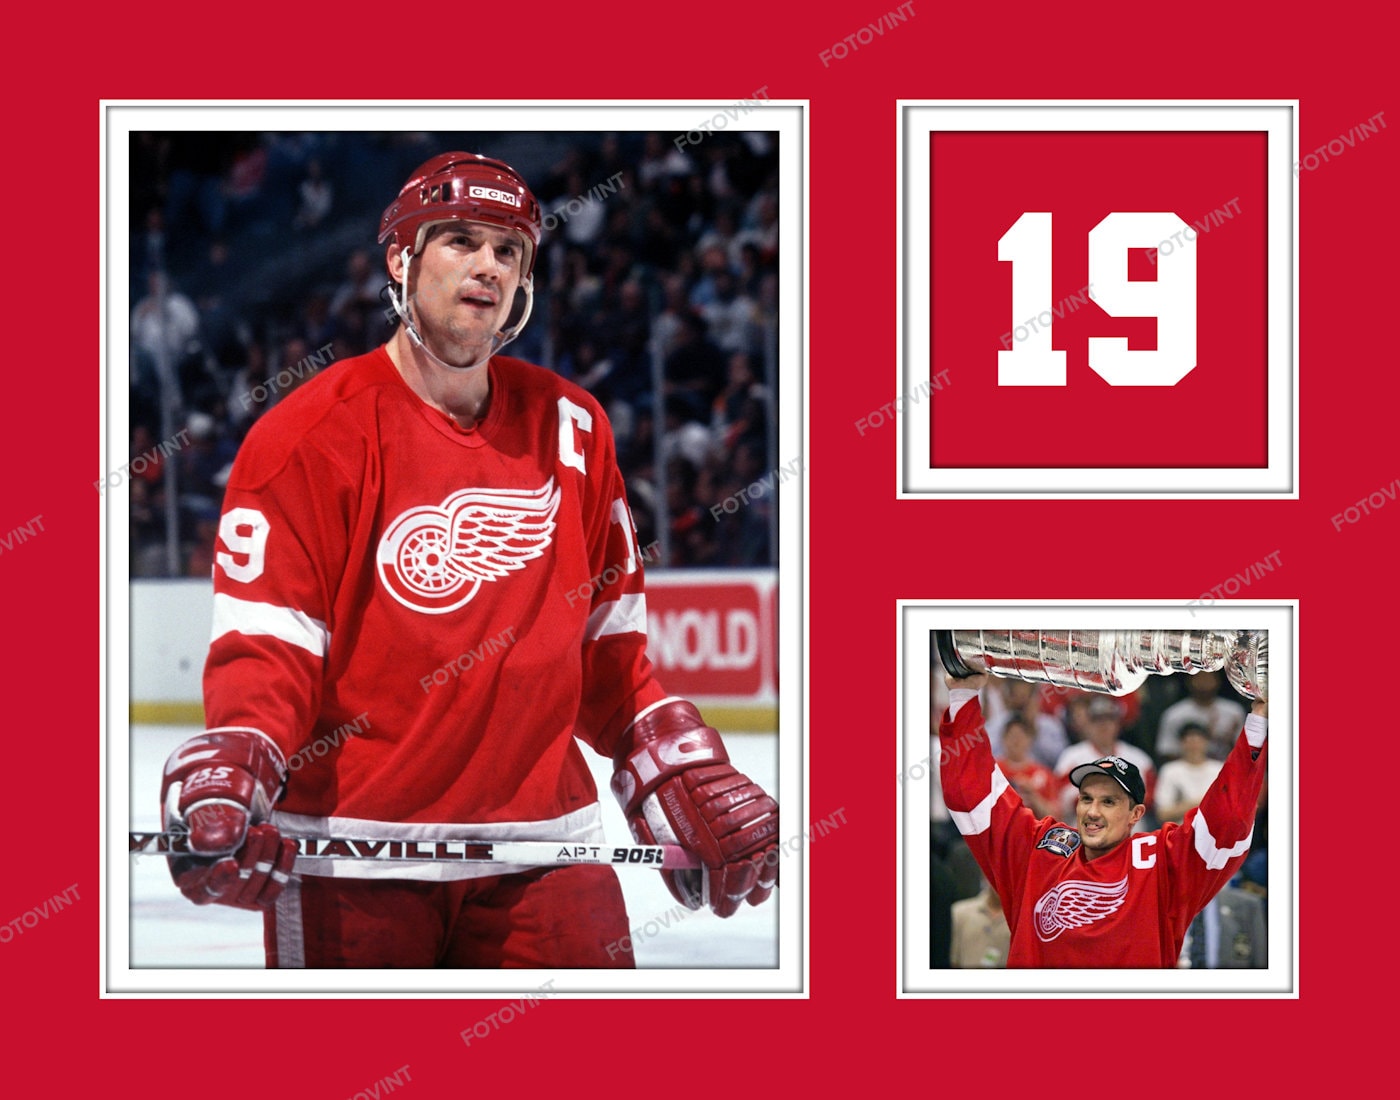 Detroit Red Wings Customized Number Kit For 1997-2007 Away Jersey